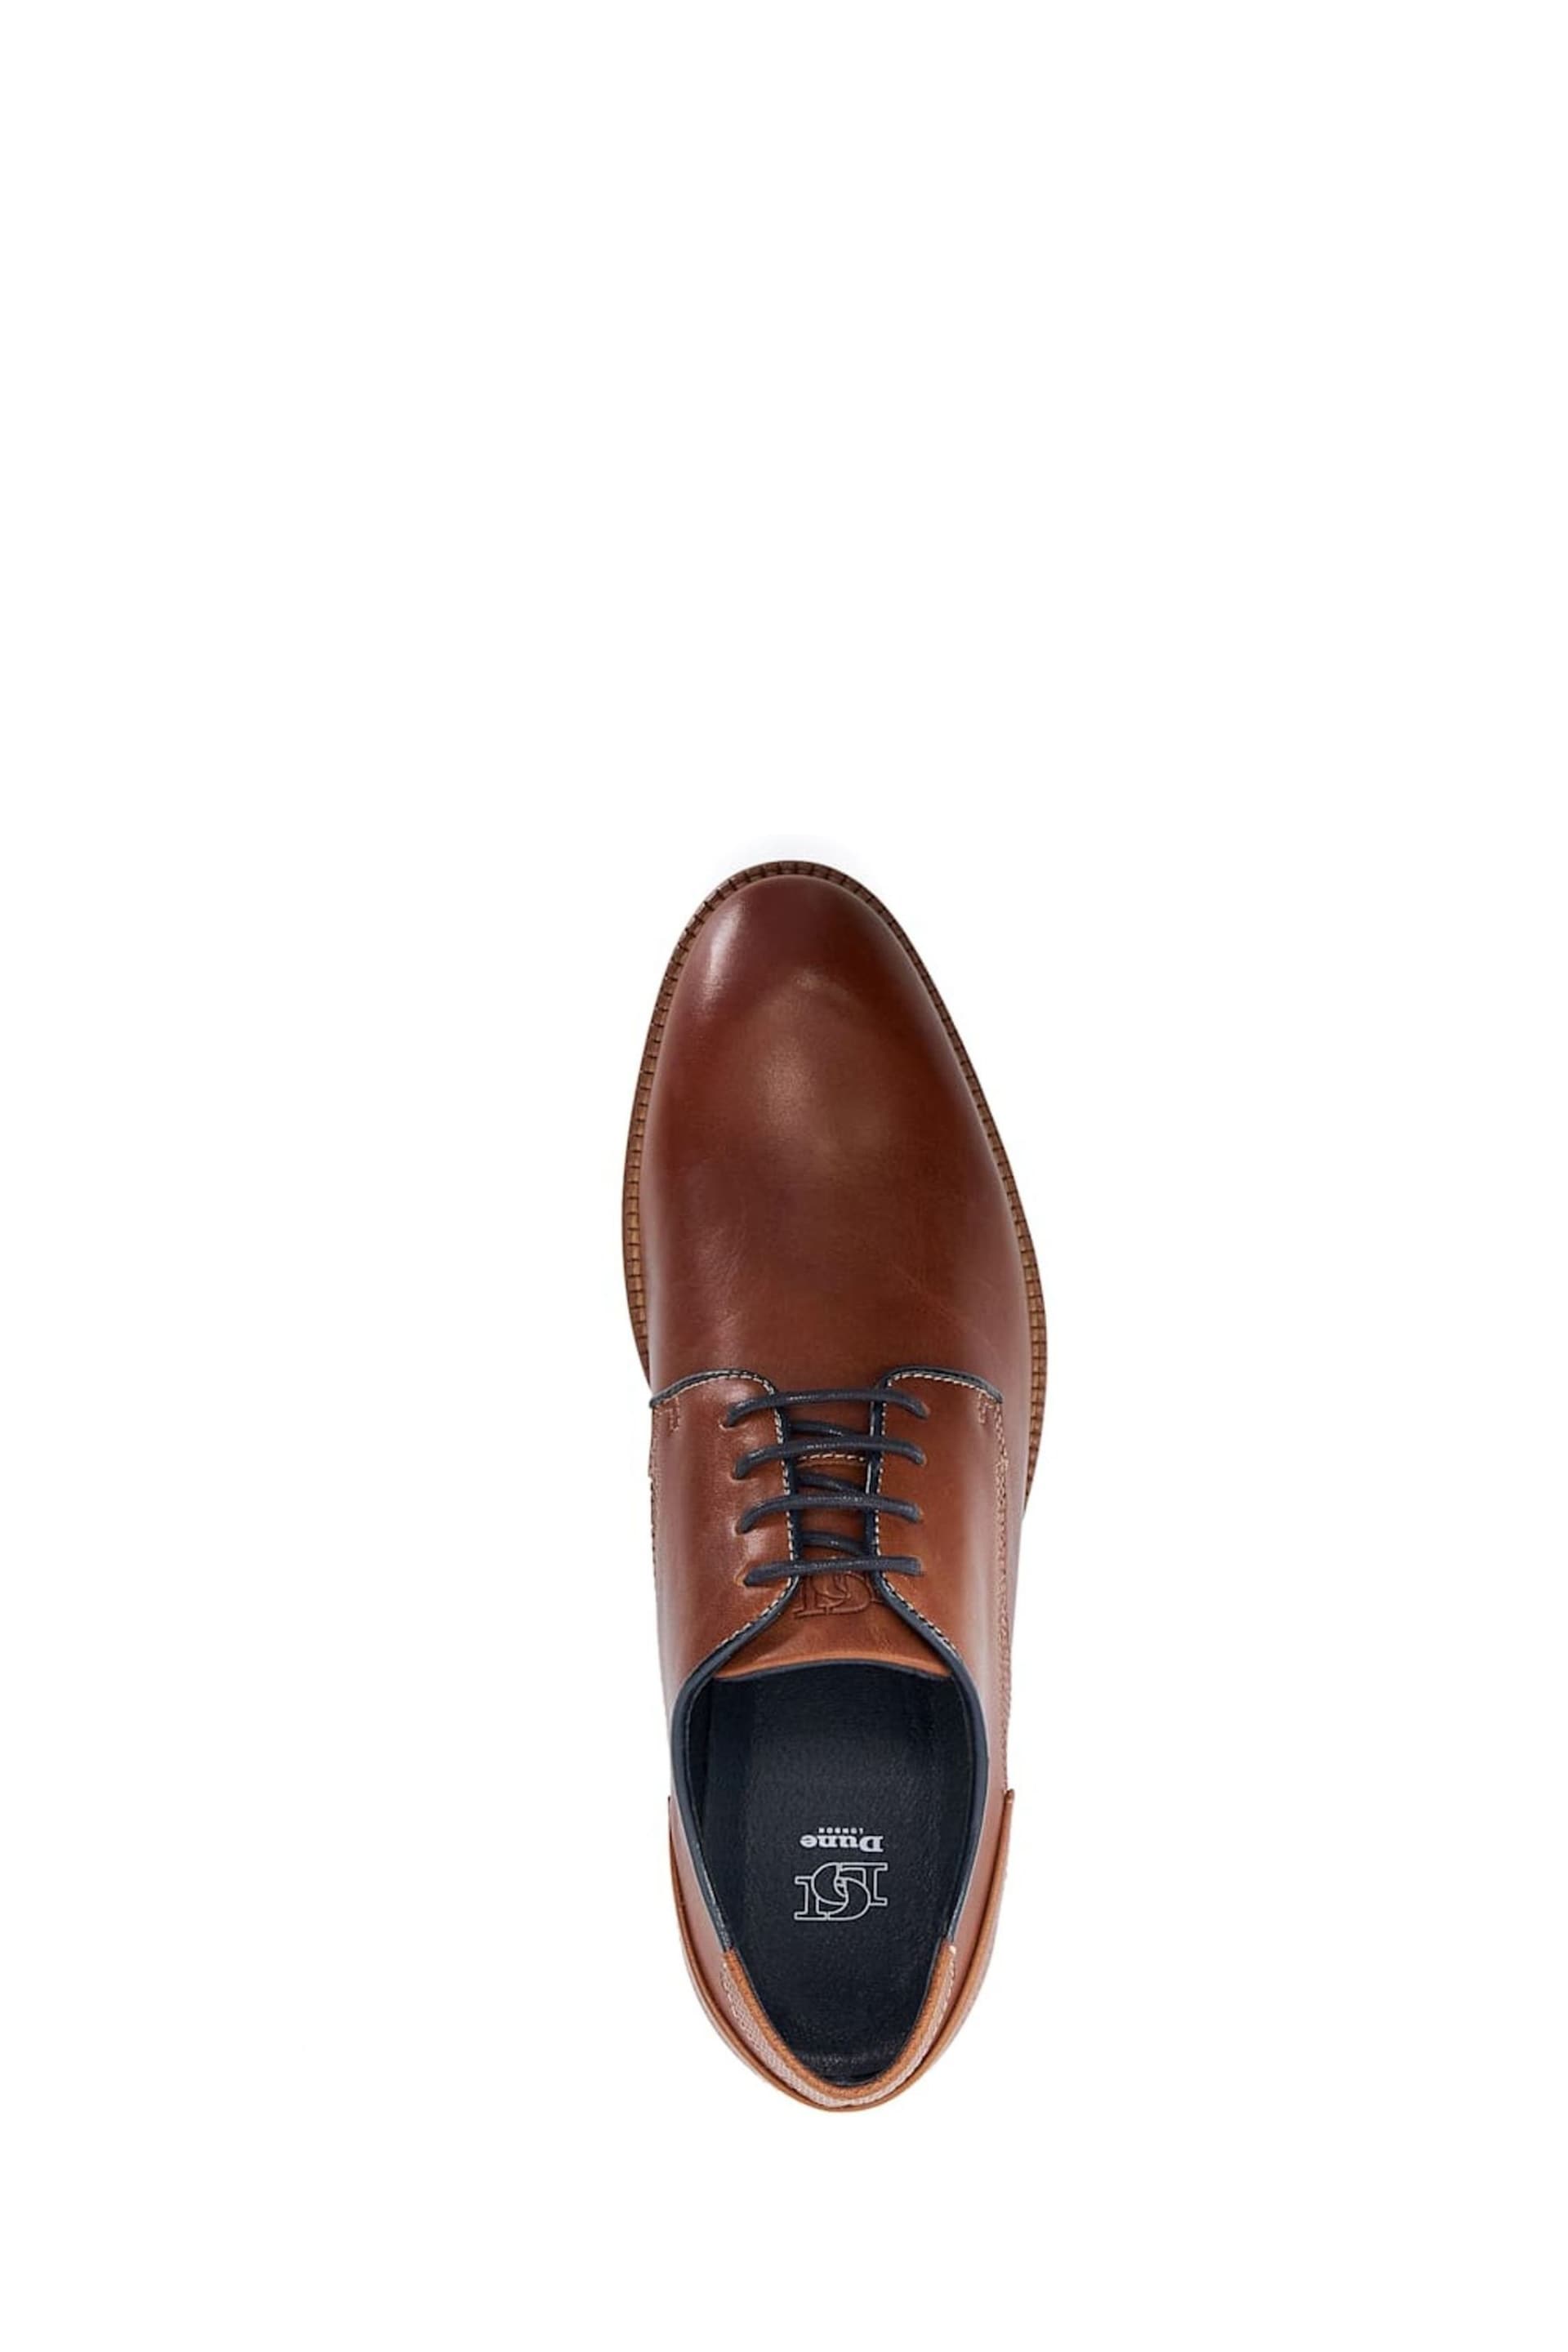 Dune London Brown Bridon Piped Gibson Casual Shoes - Image 4 of 5